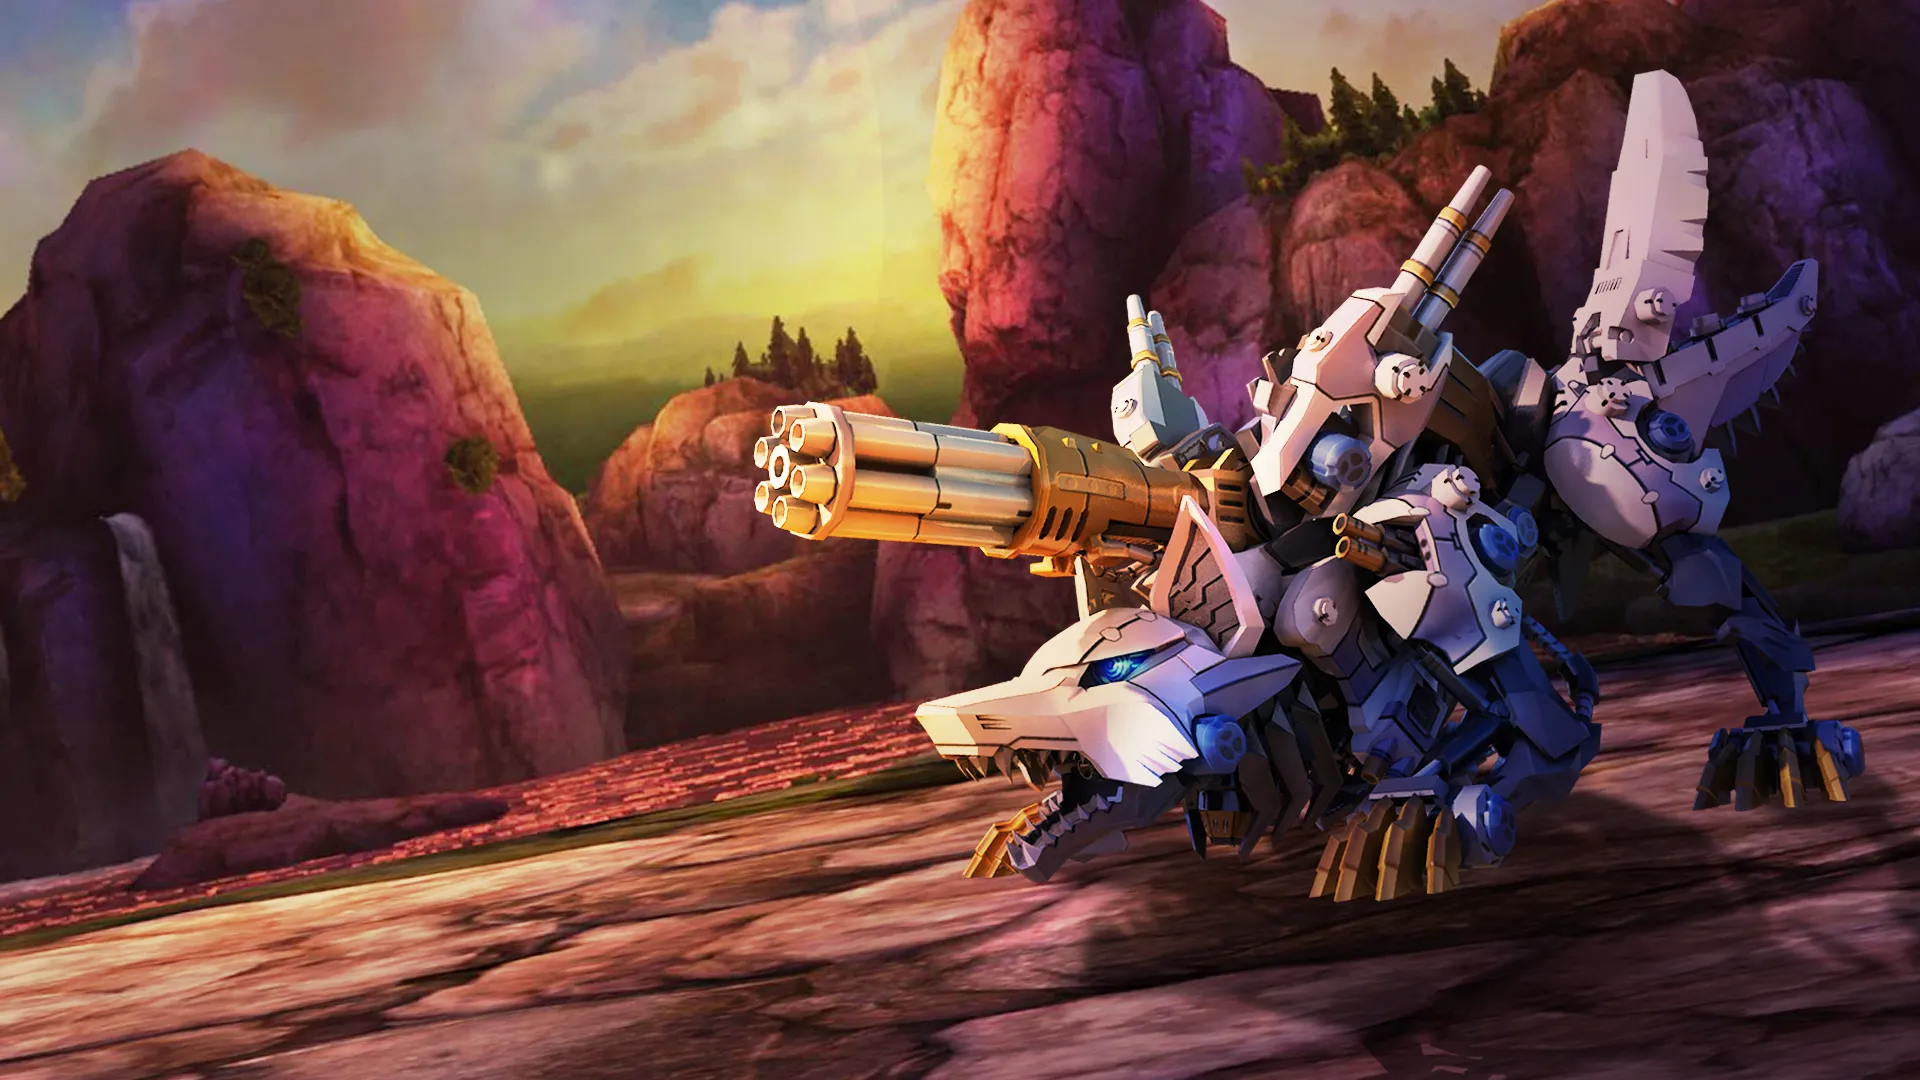 A Gatling Fox in the Zoids universe. Image: Act Games.